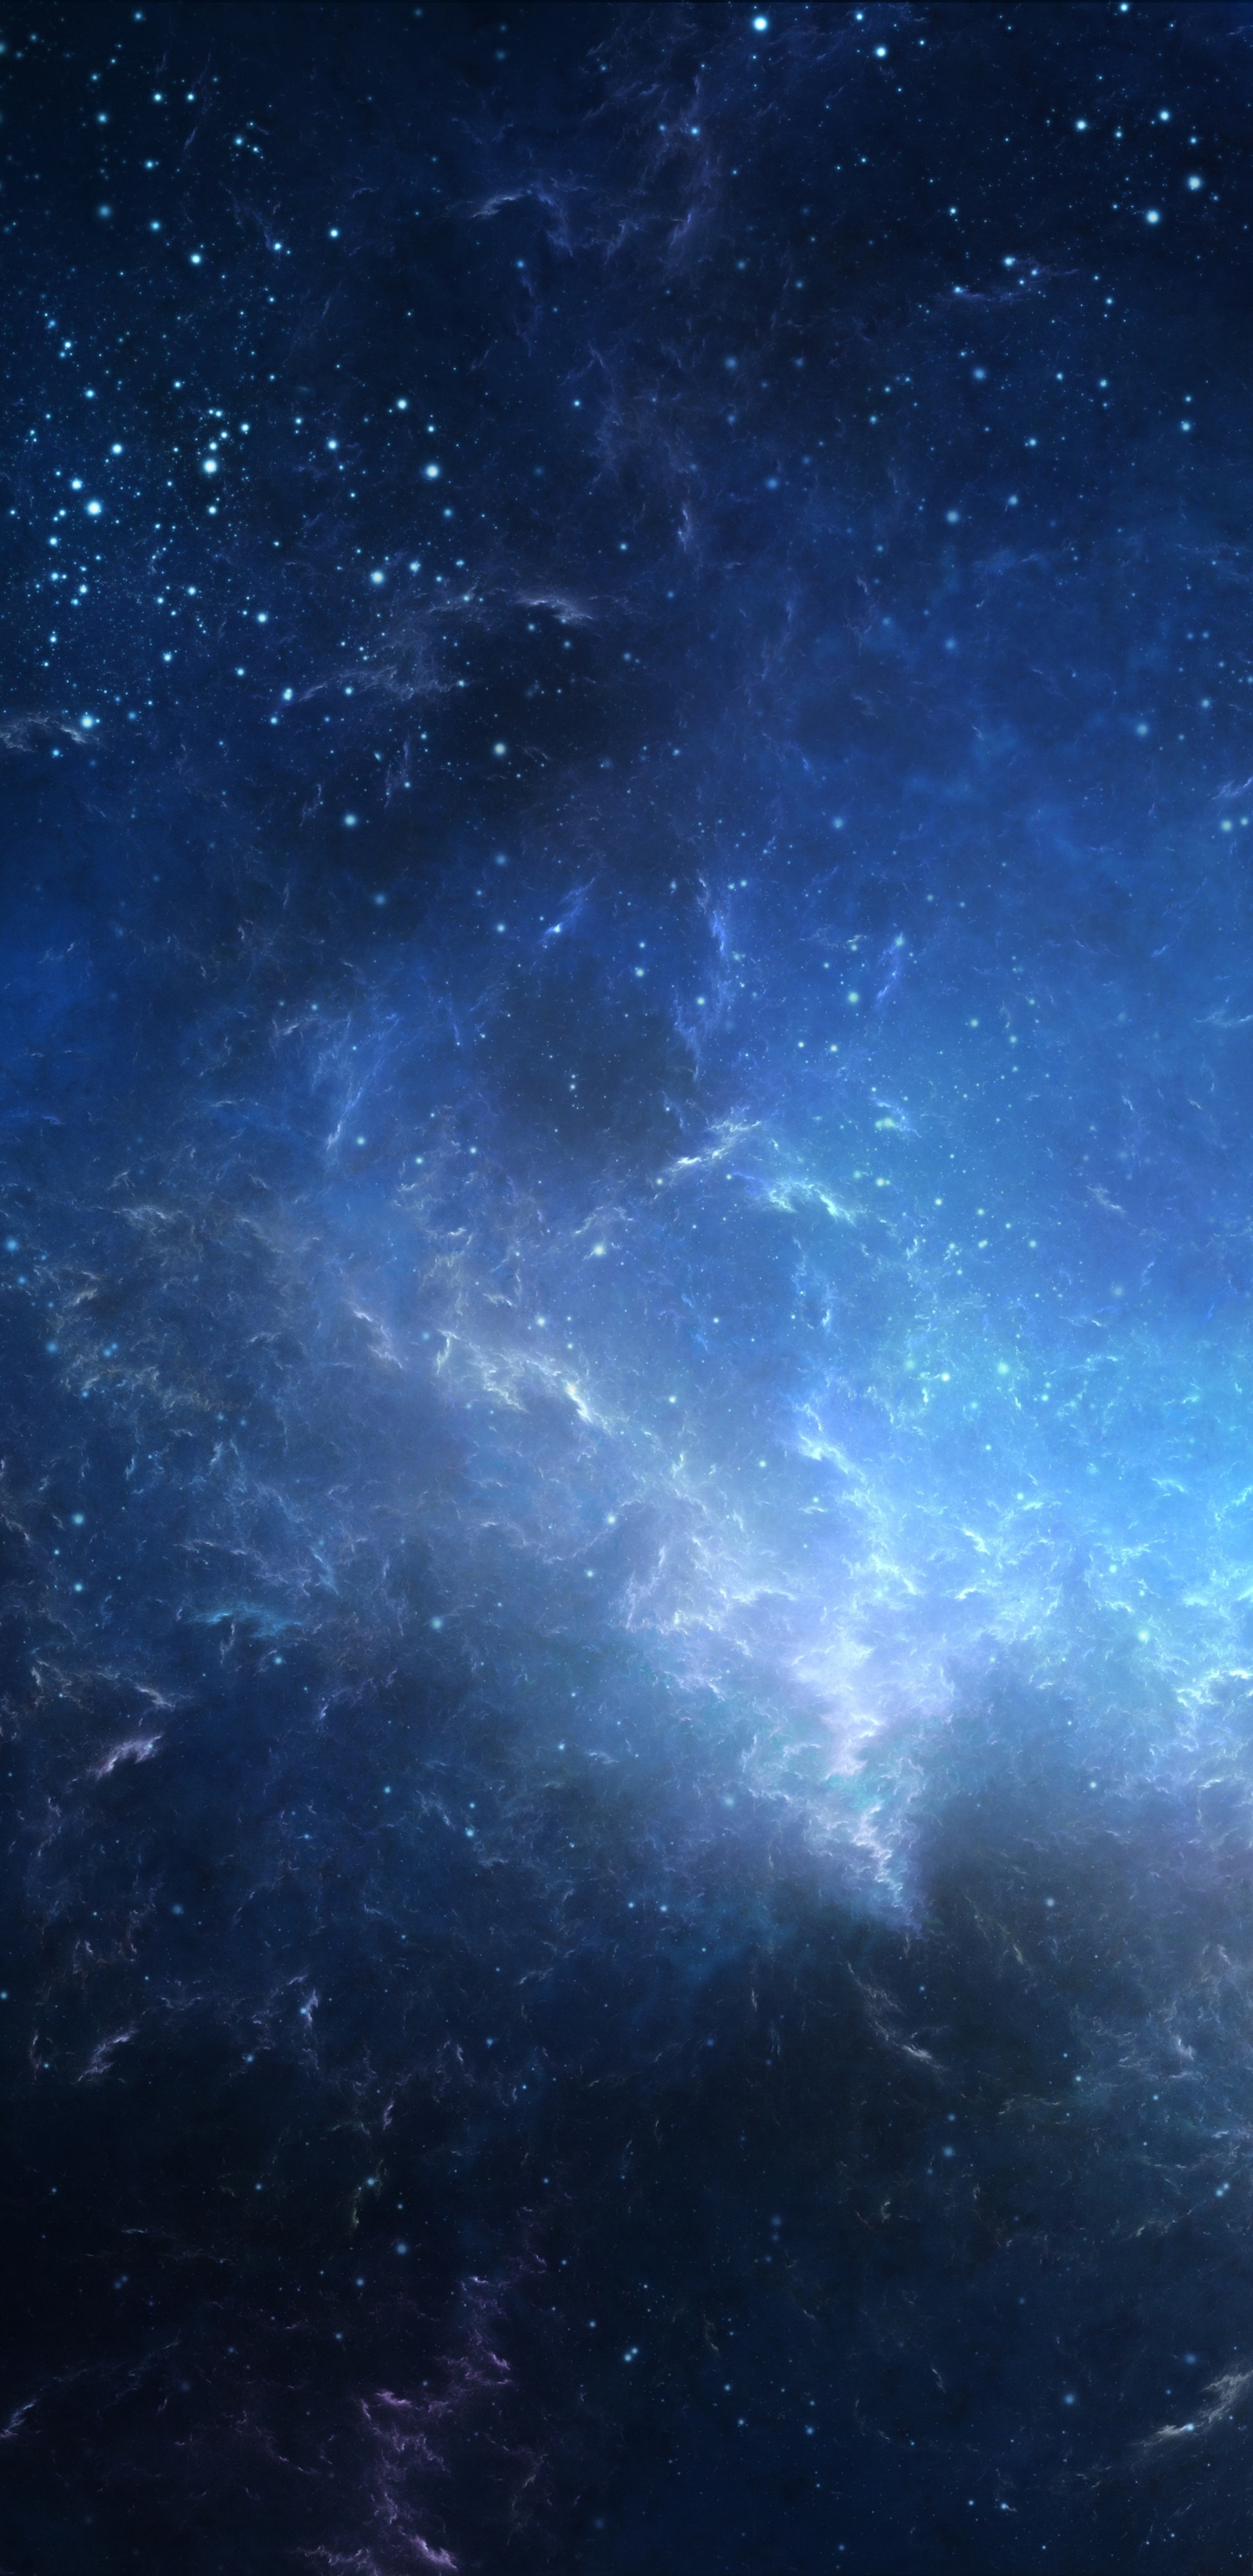 Blue and White Starry Night. Wallpaper in 1440x2960 Resolution